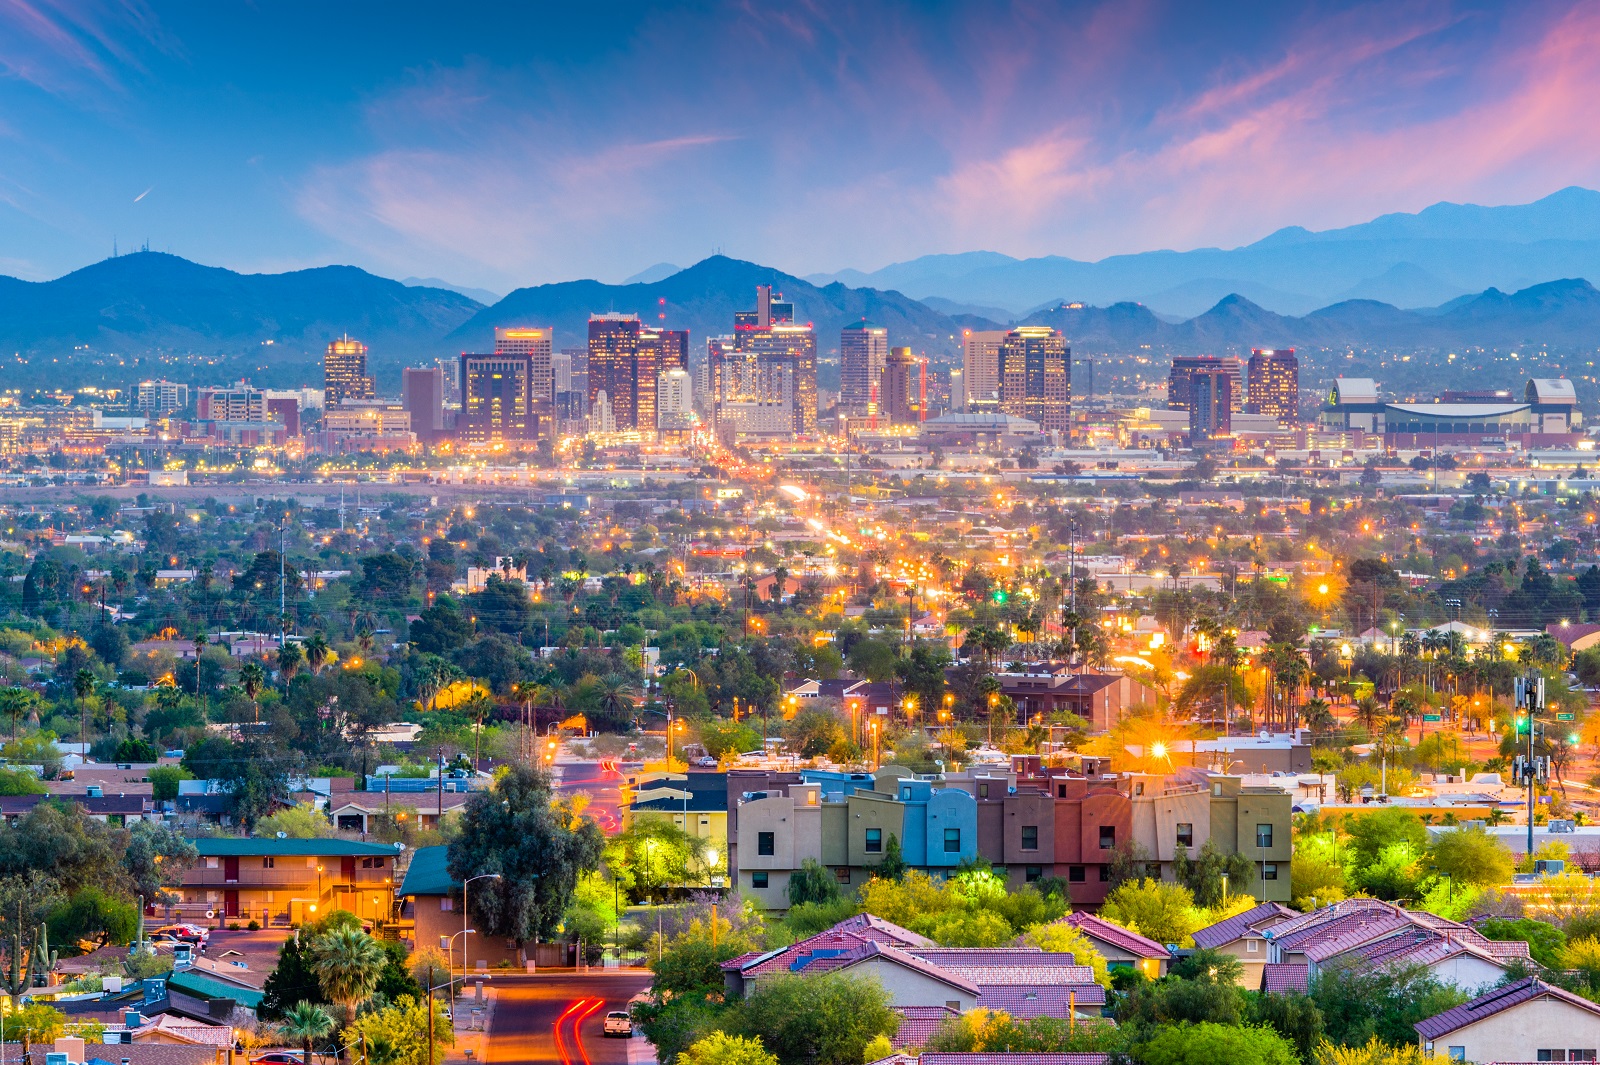 <p class="wp-caption-text">Image Credit: Shutterstock / Sean Pavone</p>  <p><span>Phoenix features wide, well-maintained streets and minimal traffic congestion, making driving here a breeze. The city’s spread-out layout makes a car almost essential.</span></p>